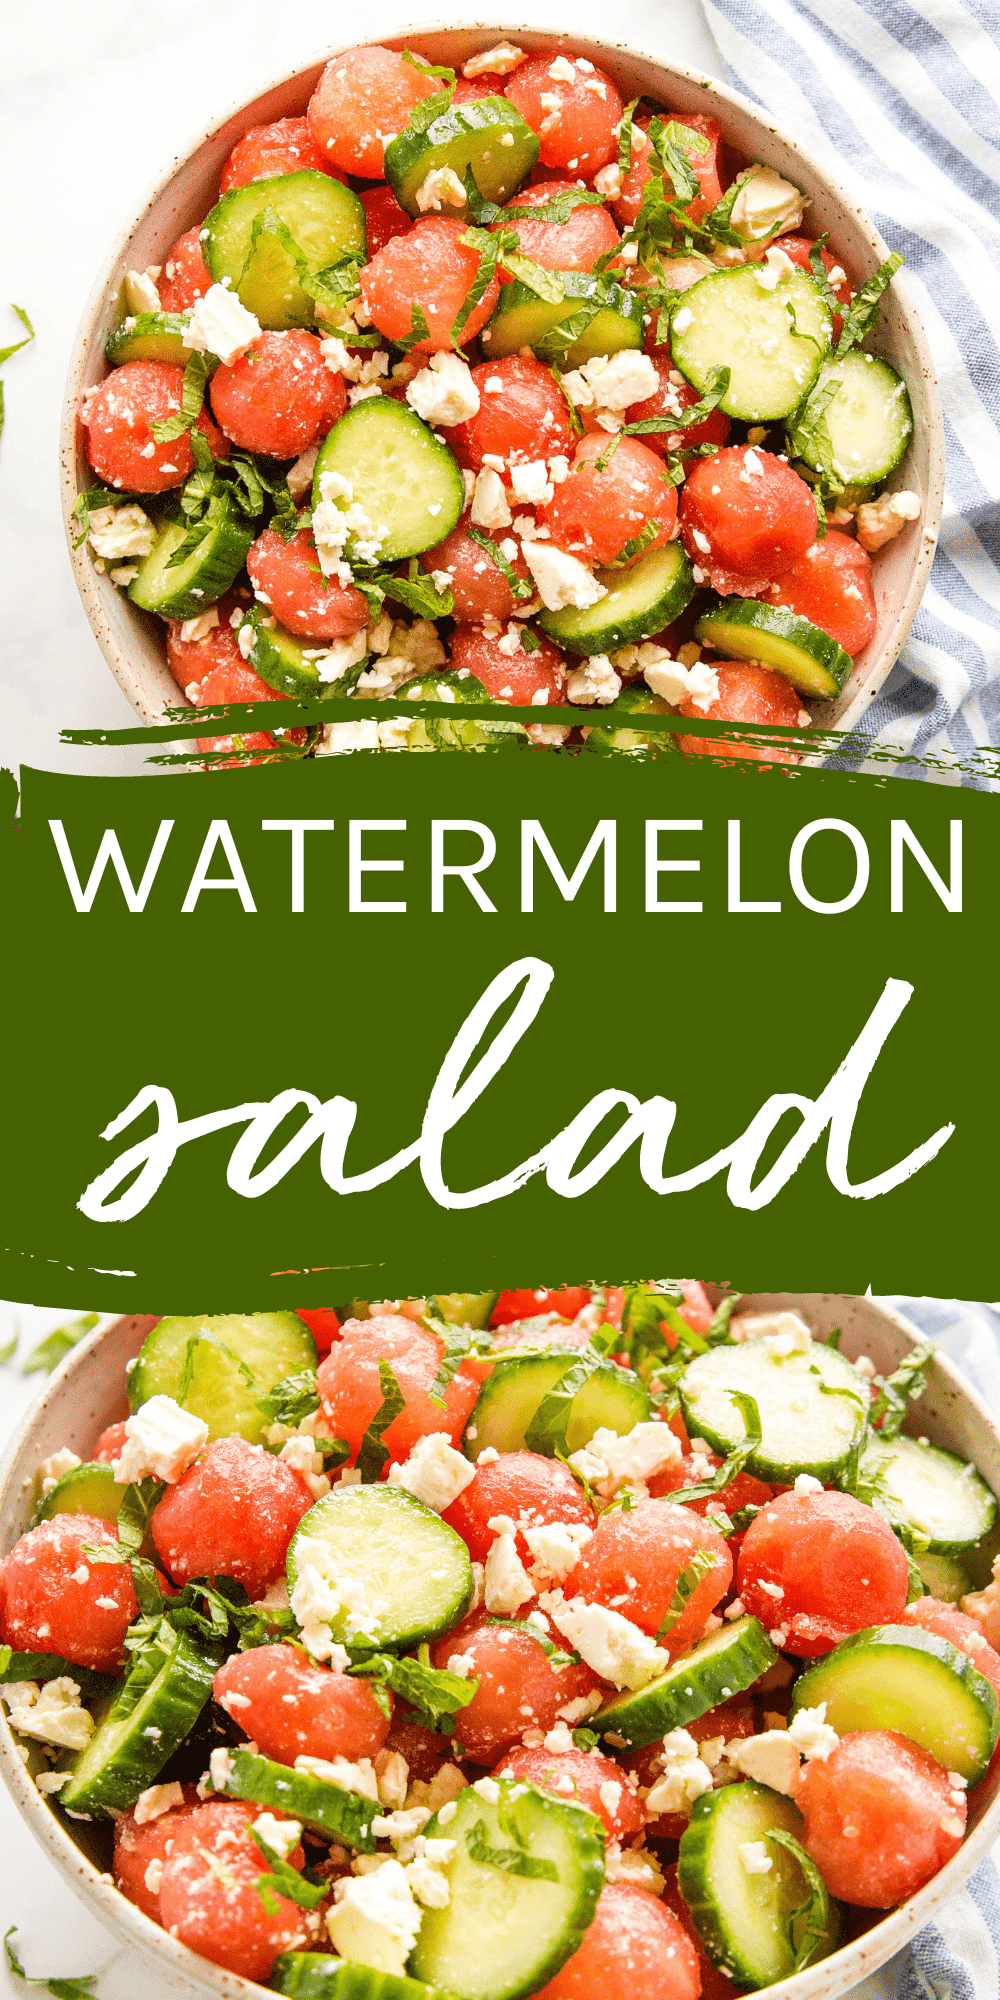 This Watermelon Salad recipe is the perfect fresh and healthy salad for summer! It's simple and easy to make with fresh watermelon, cucumber, fresh mint, and feta. Recipe from thebusybaker.ca! #watermelonsalad #watermelonfetasalad #watermeloncucumbersalad #freshsalad #healthysalad #fruitsalad #health #healthy via @busybakerblog